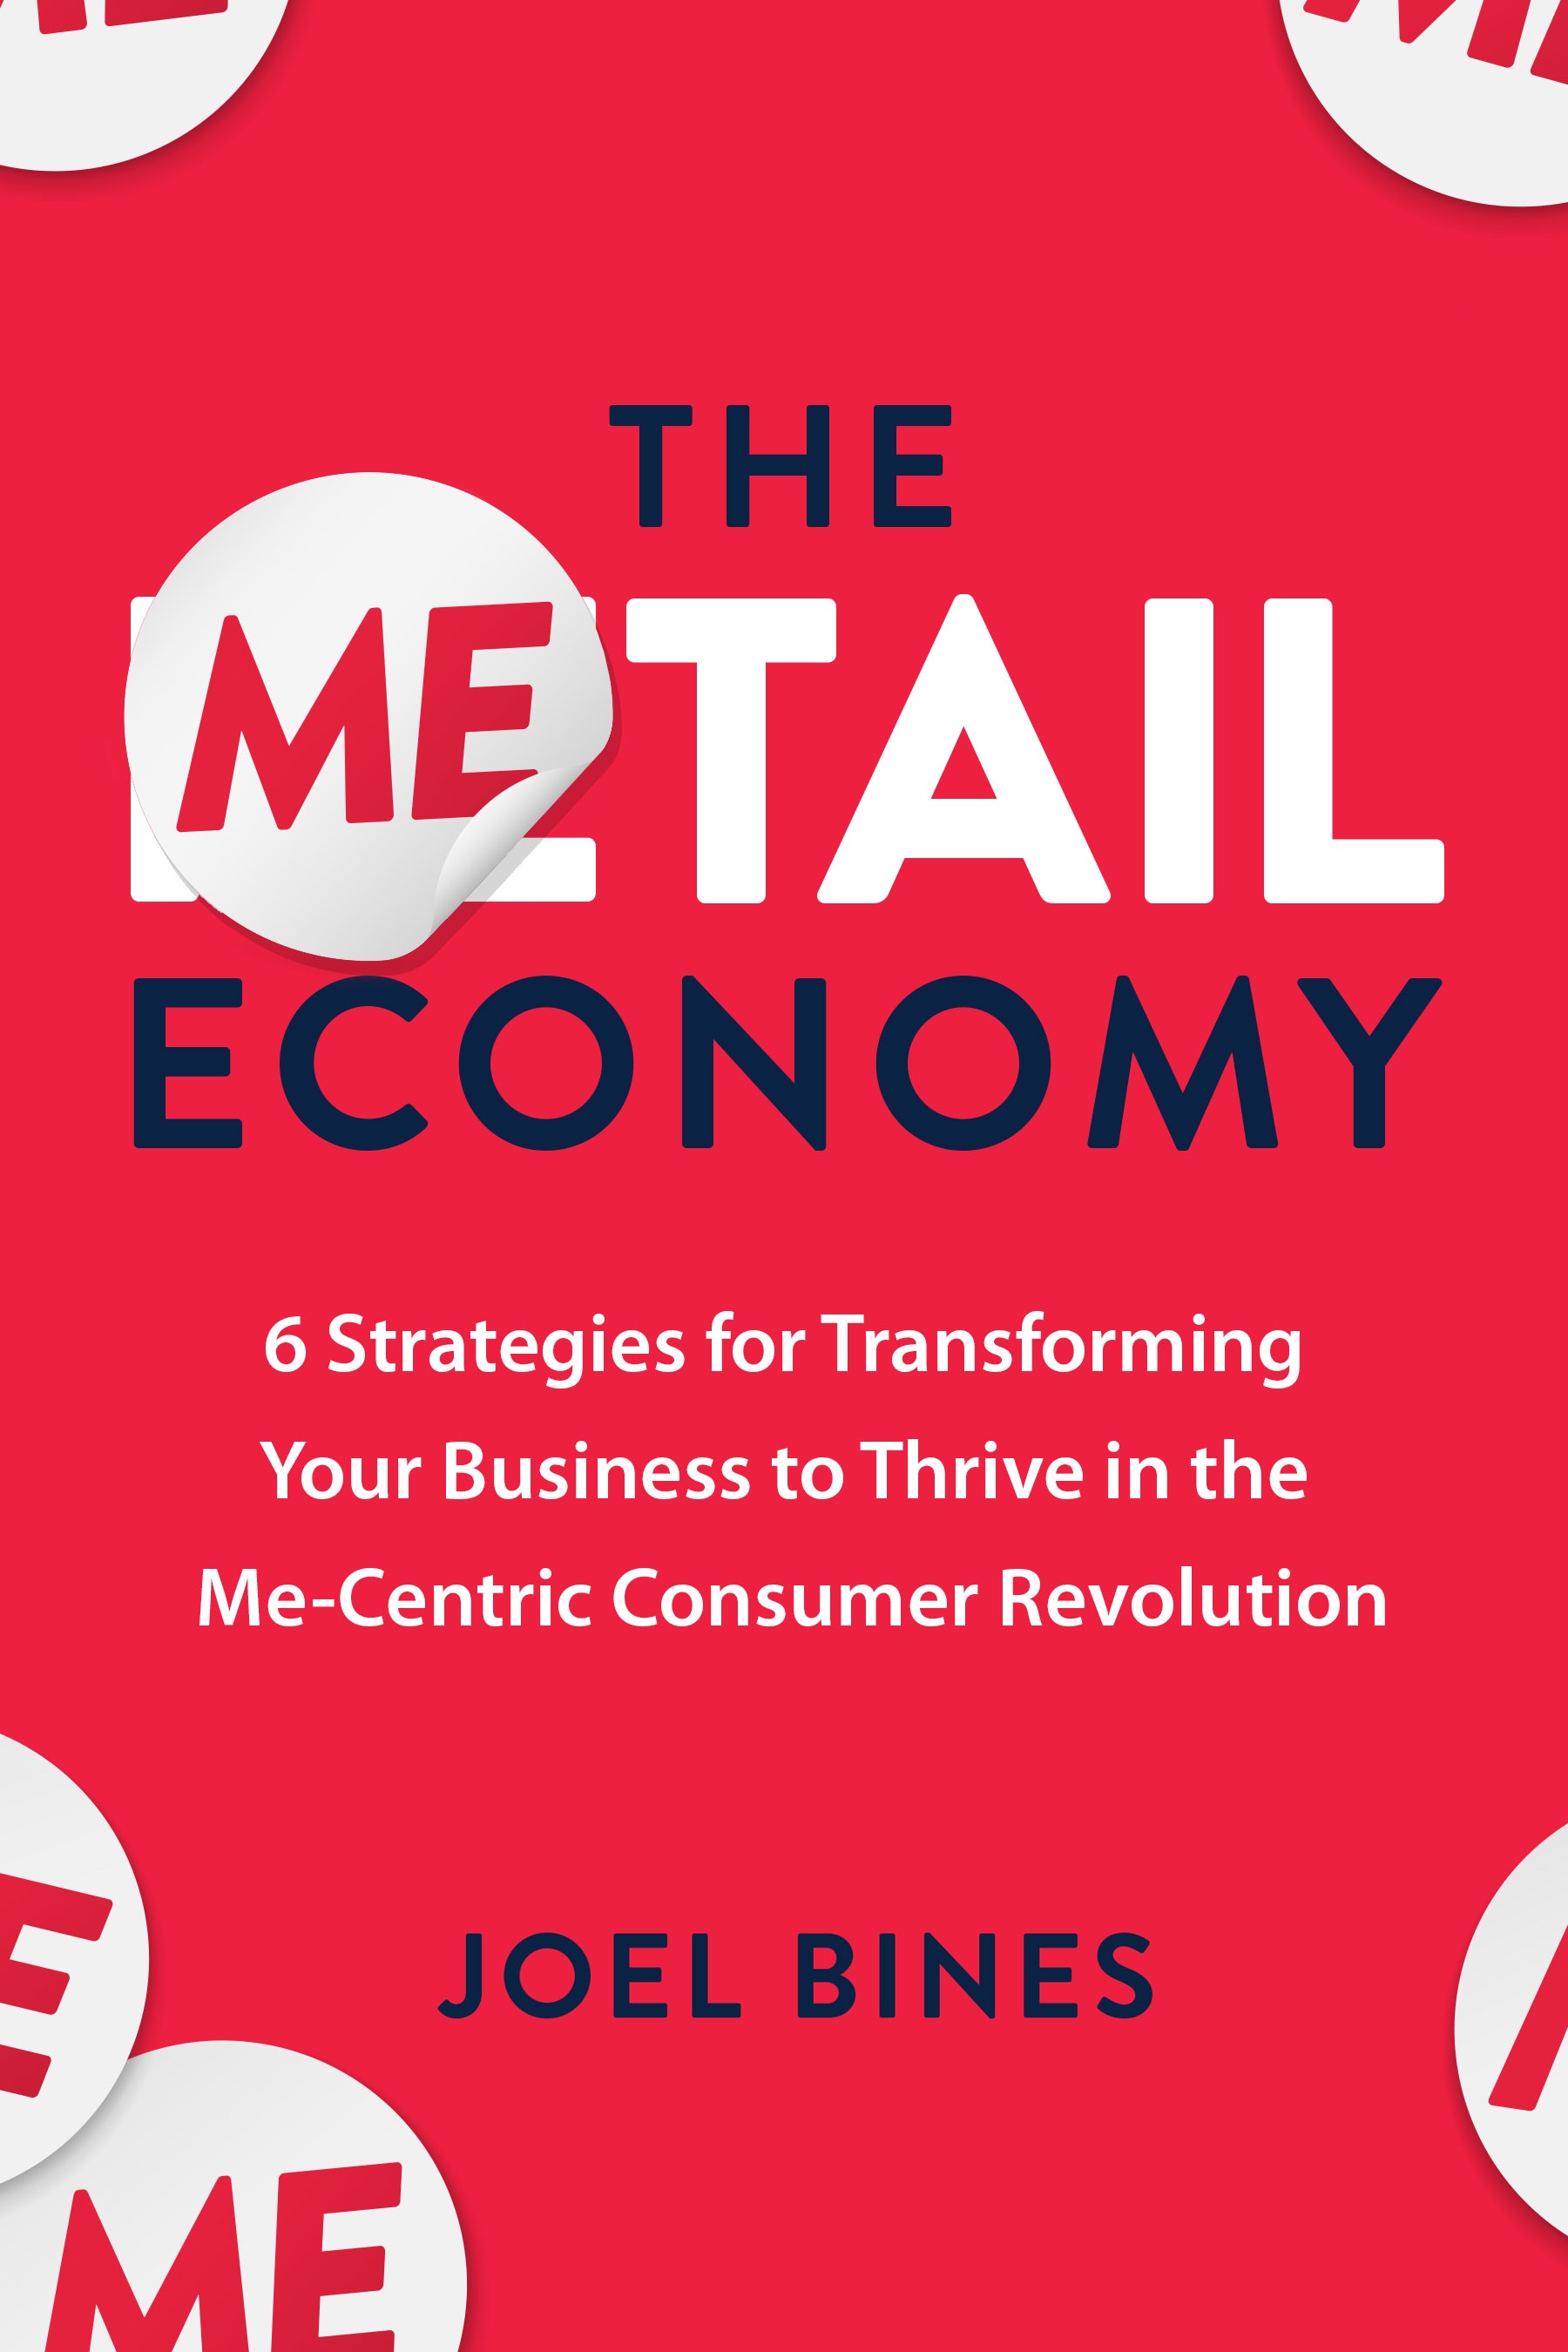 Metail Economy: 6 Strategies for Transforming Your Business to Thrive in the Me-Centric Consumer Rev